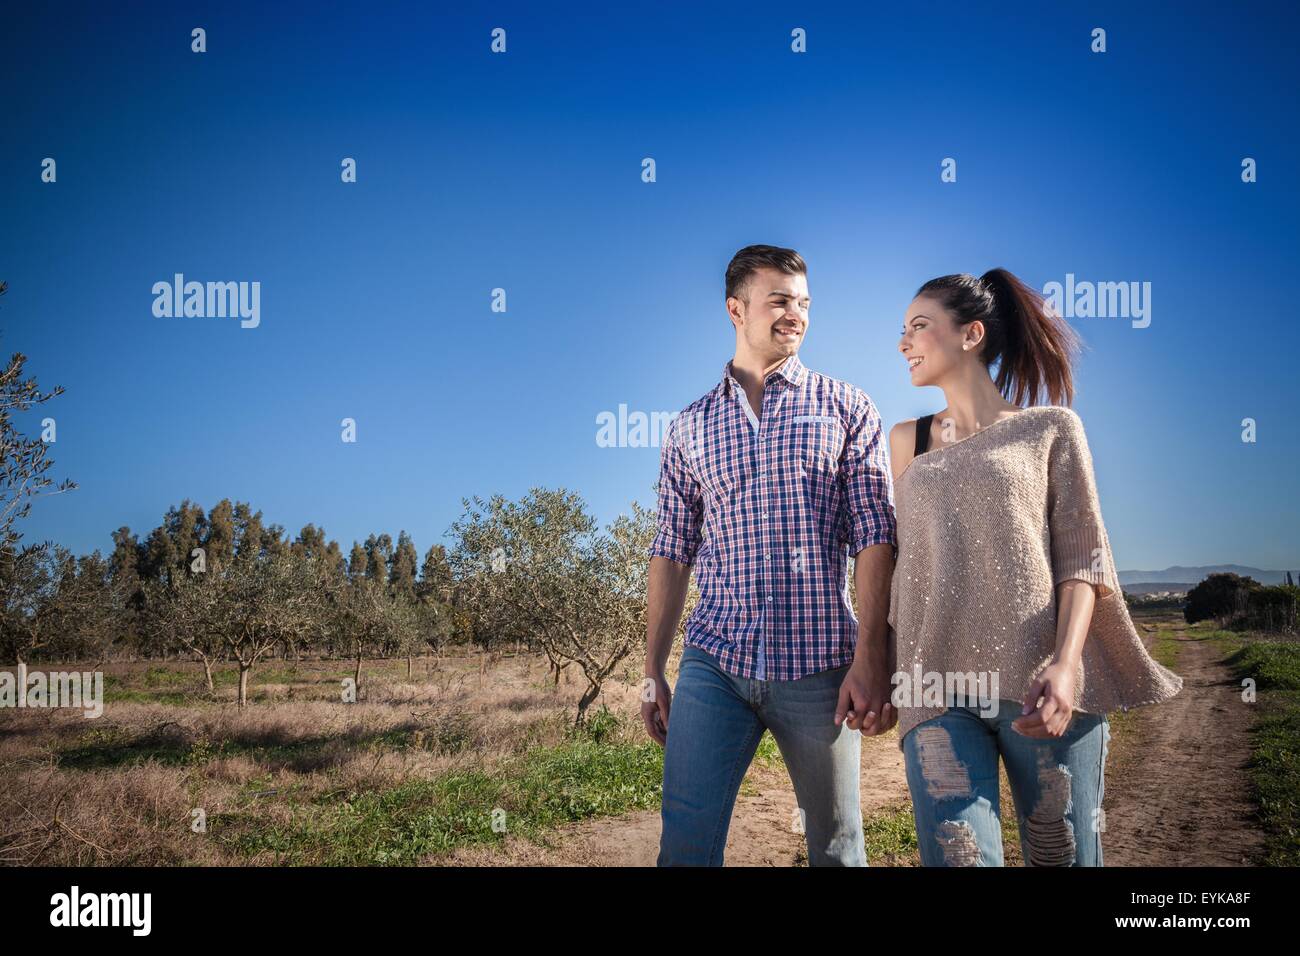 Young couple holding hands in field Banque D'Images